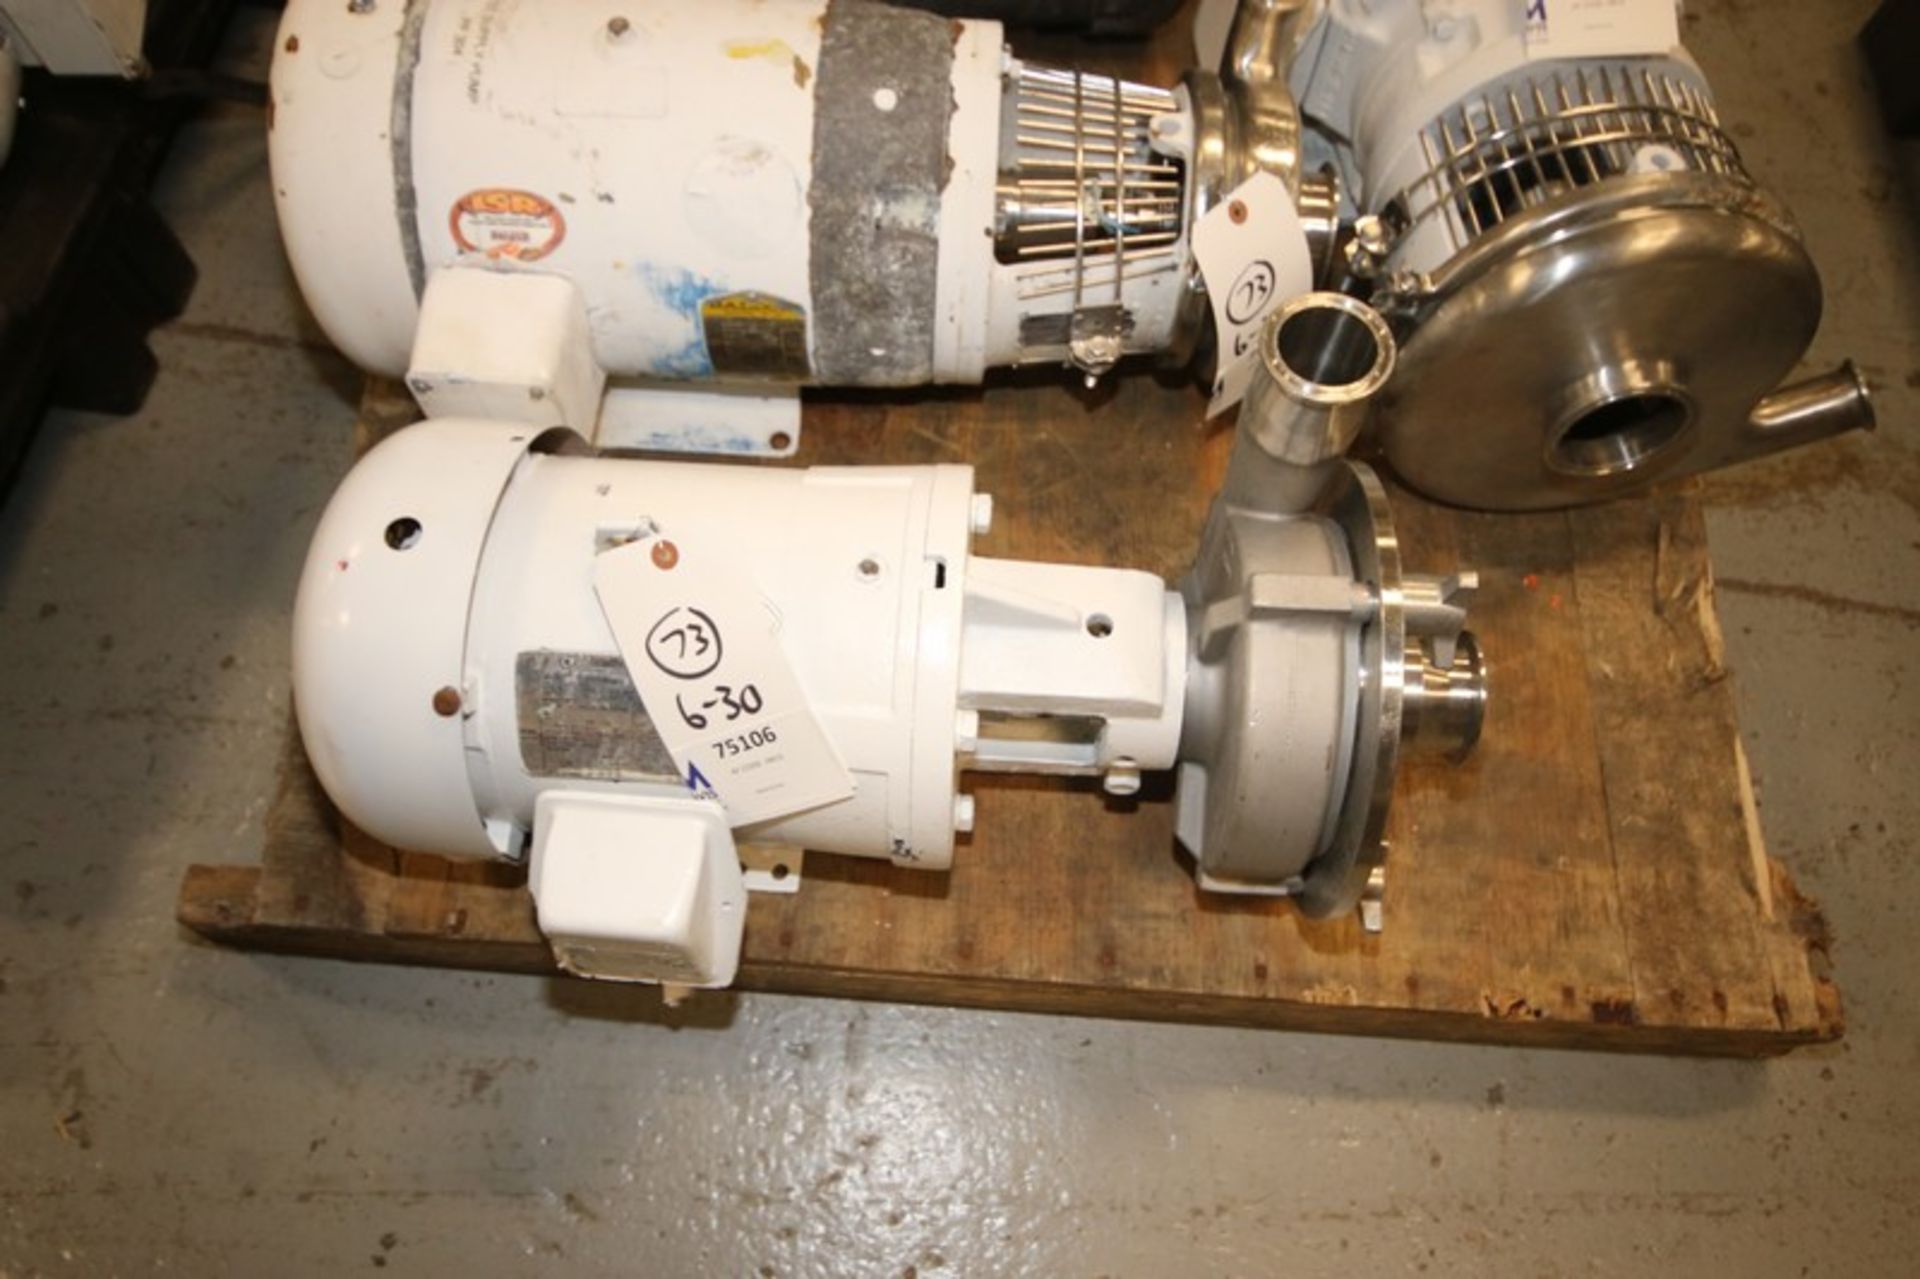 Fristam 3/2 hp Centrifugal Pump, M/N FPX 3531004674, with 2.5" x 2" Clamp Type S/S Head, with - Image 2 of 3